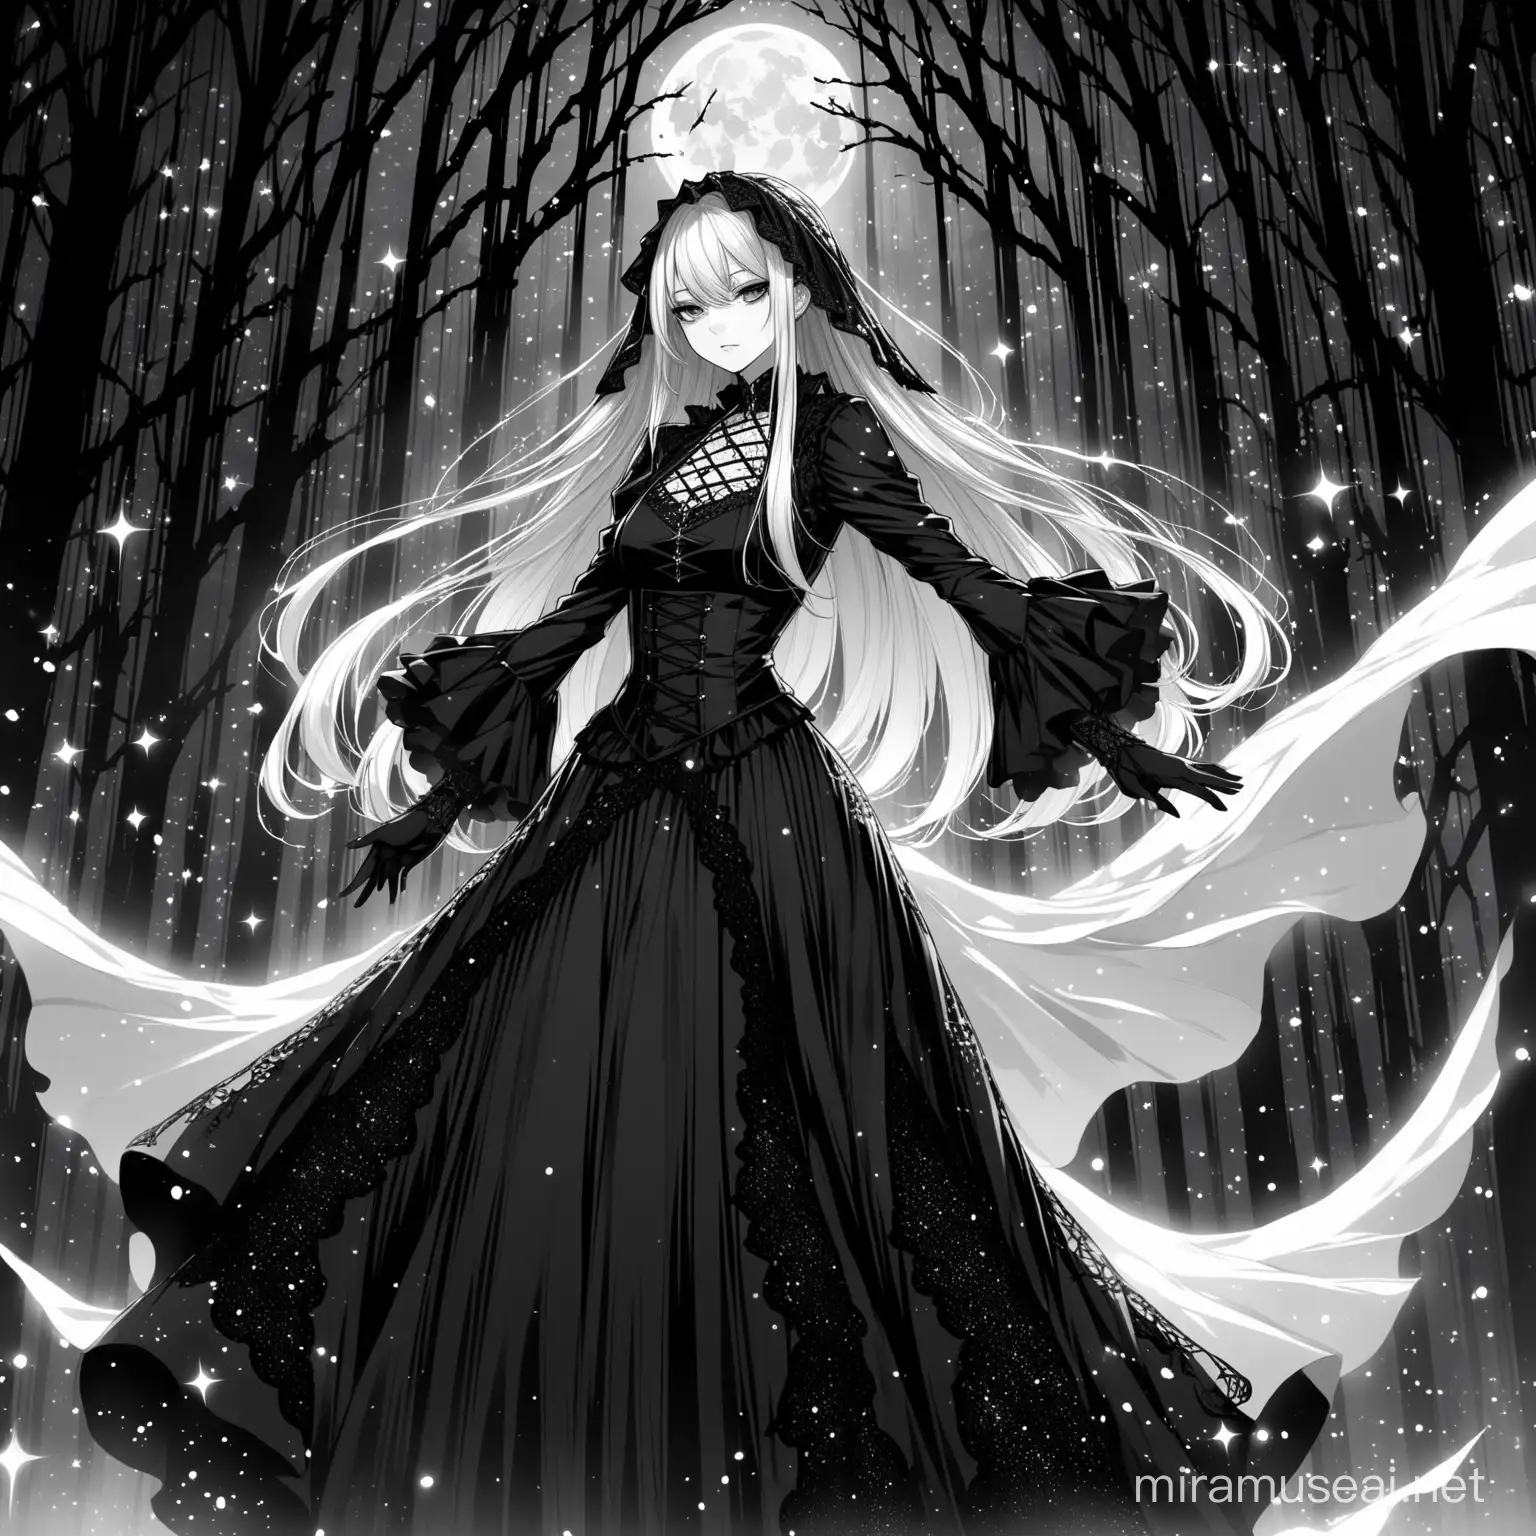 Enigmatic Gothic Anime Woman Amidst Sparkling Darkness